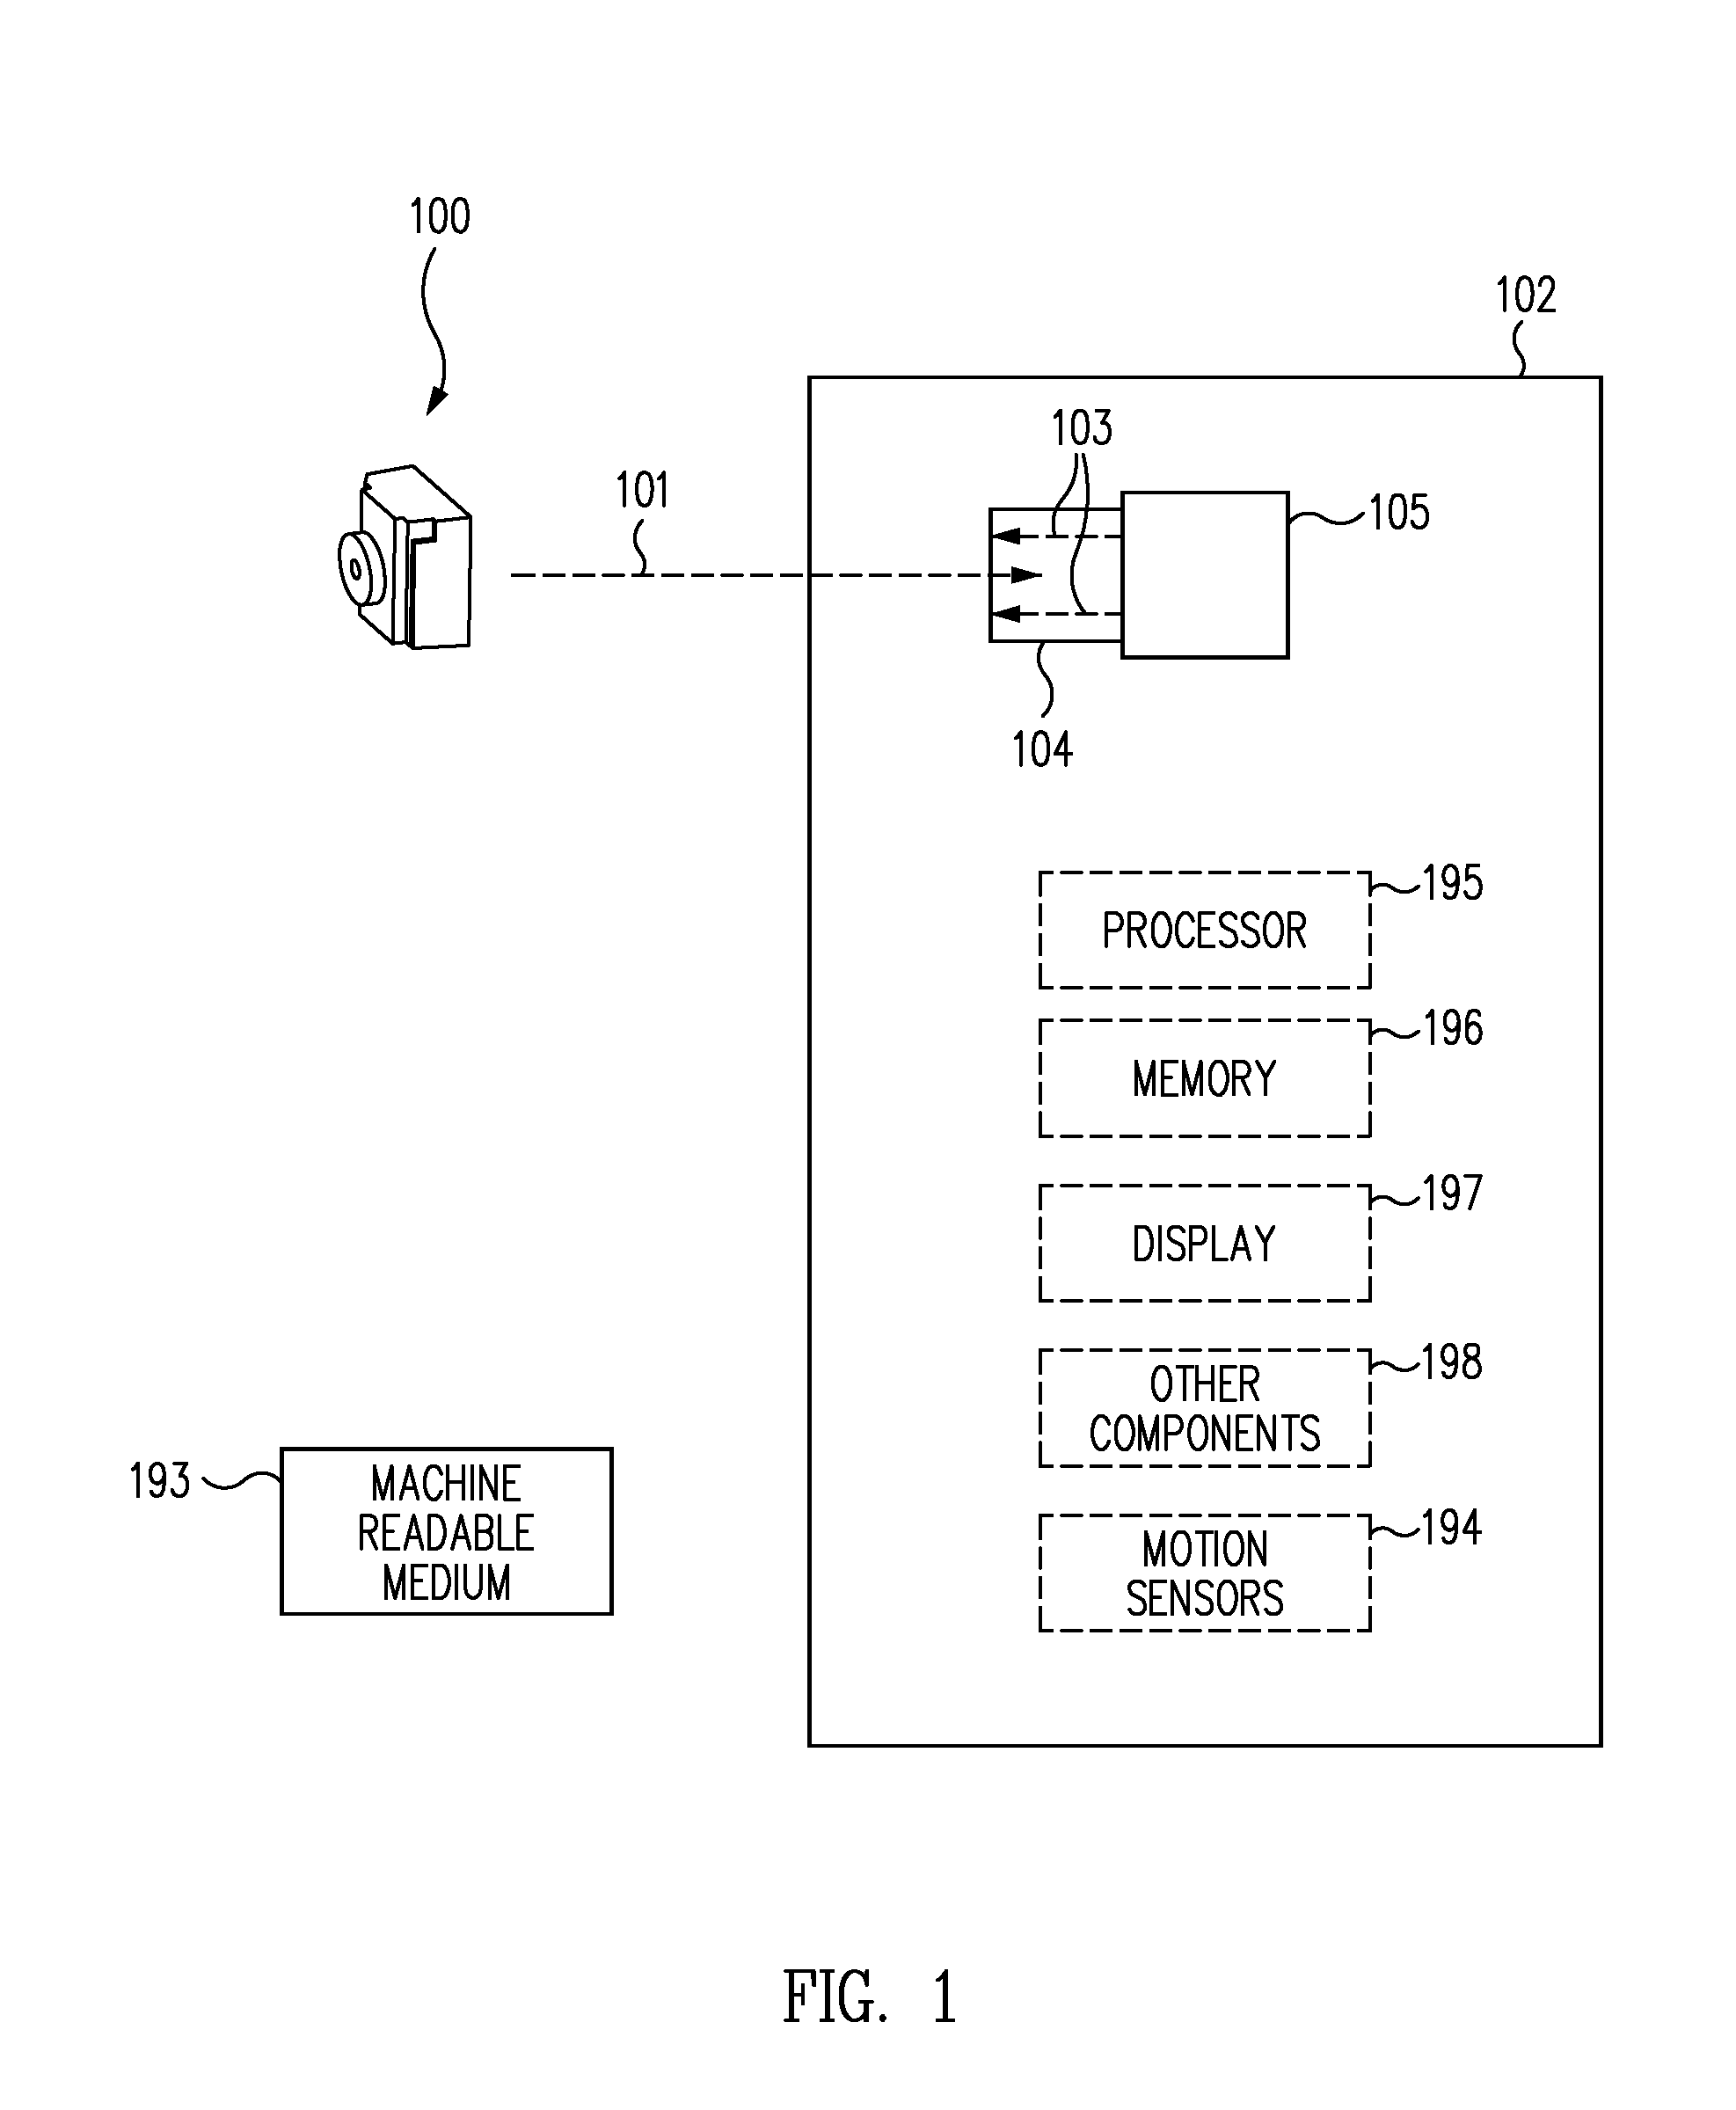 Systems and methods for intelligent monitoring of thoroughfares using thermal imaging